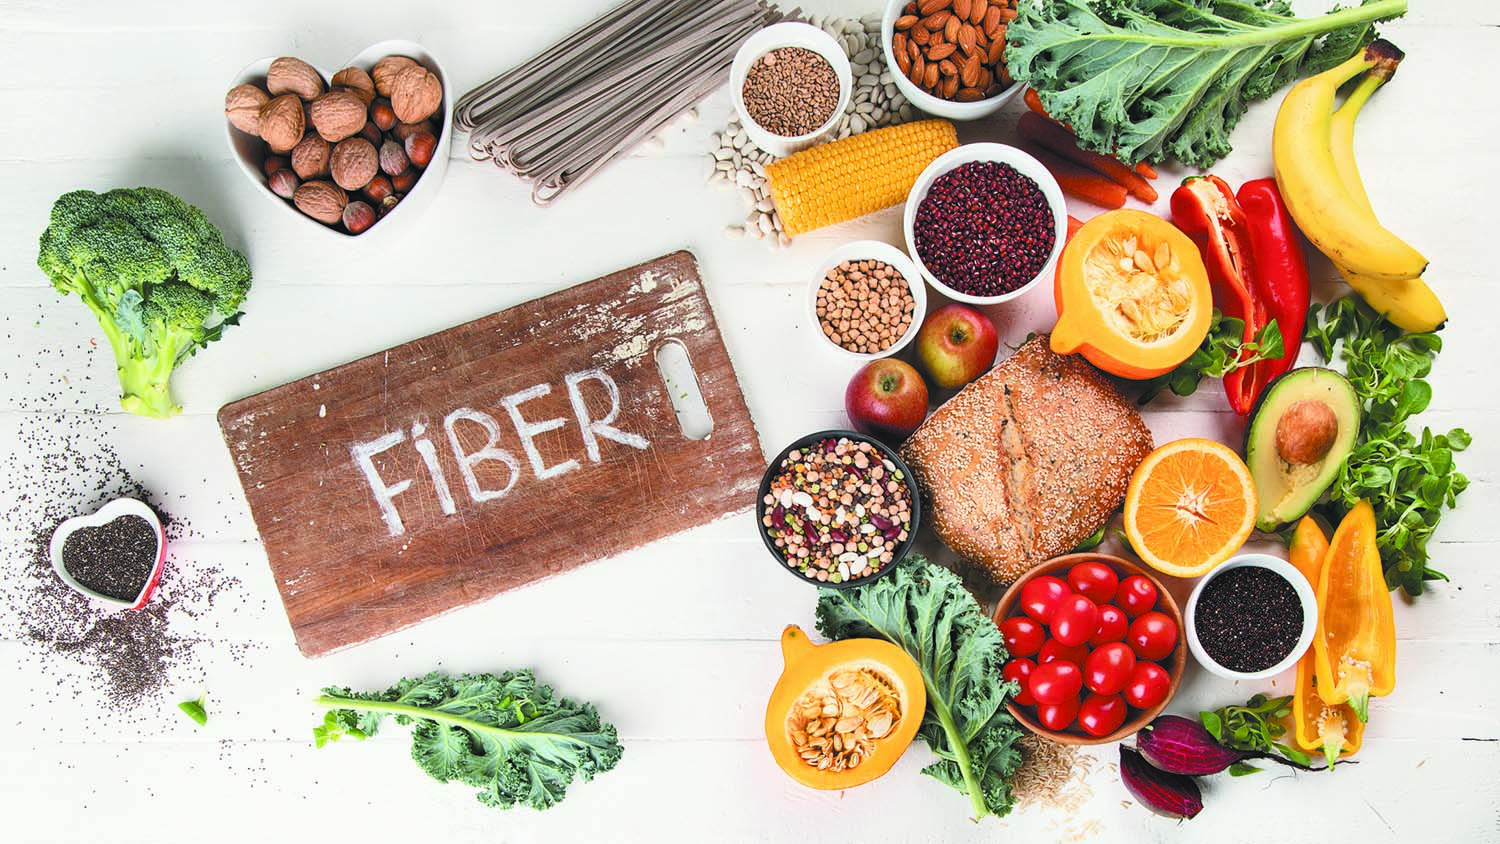 High fibre foods may increase risk of Breast Cancer